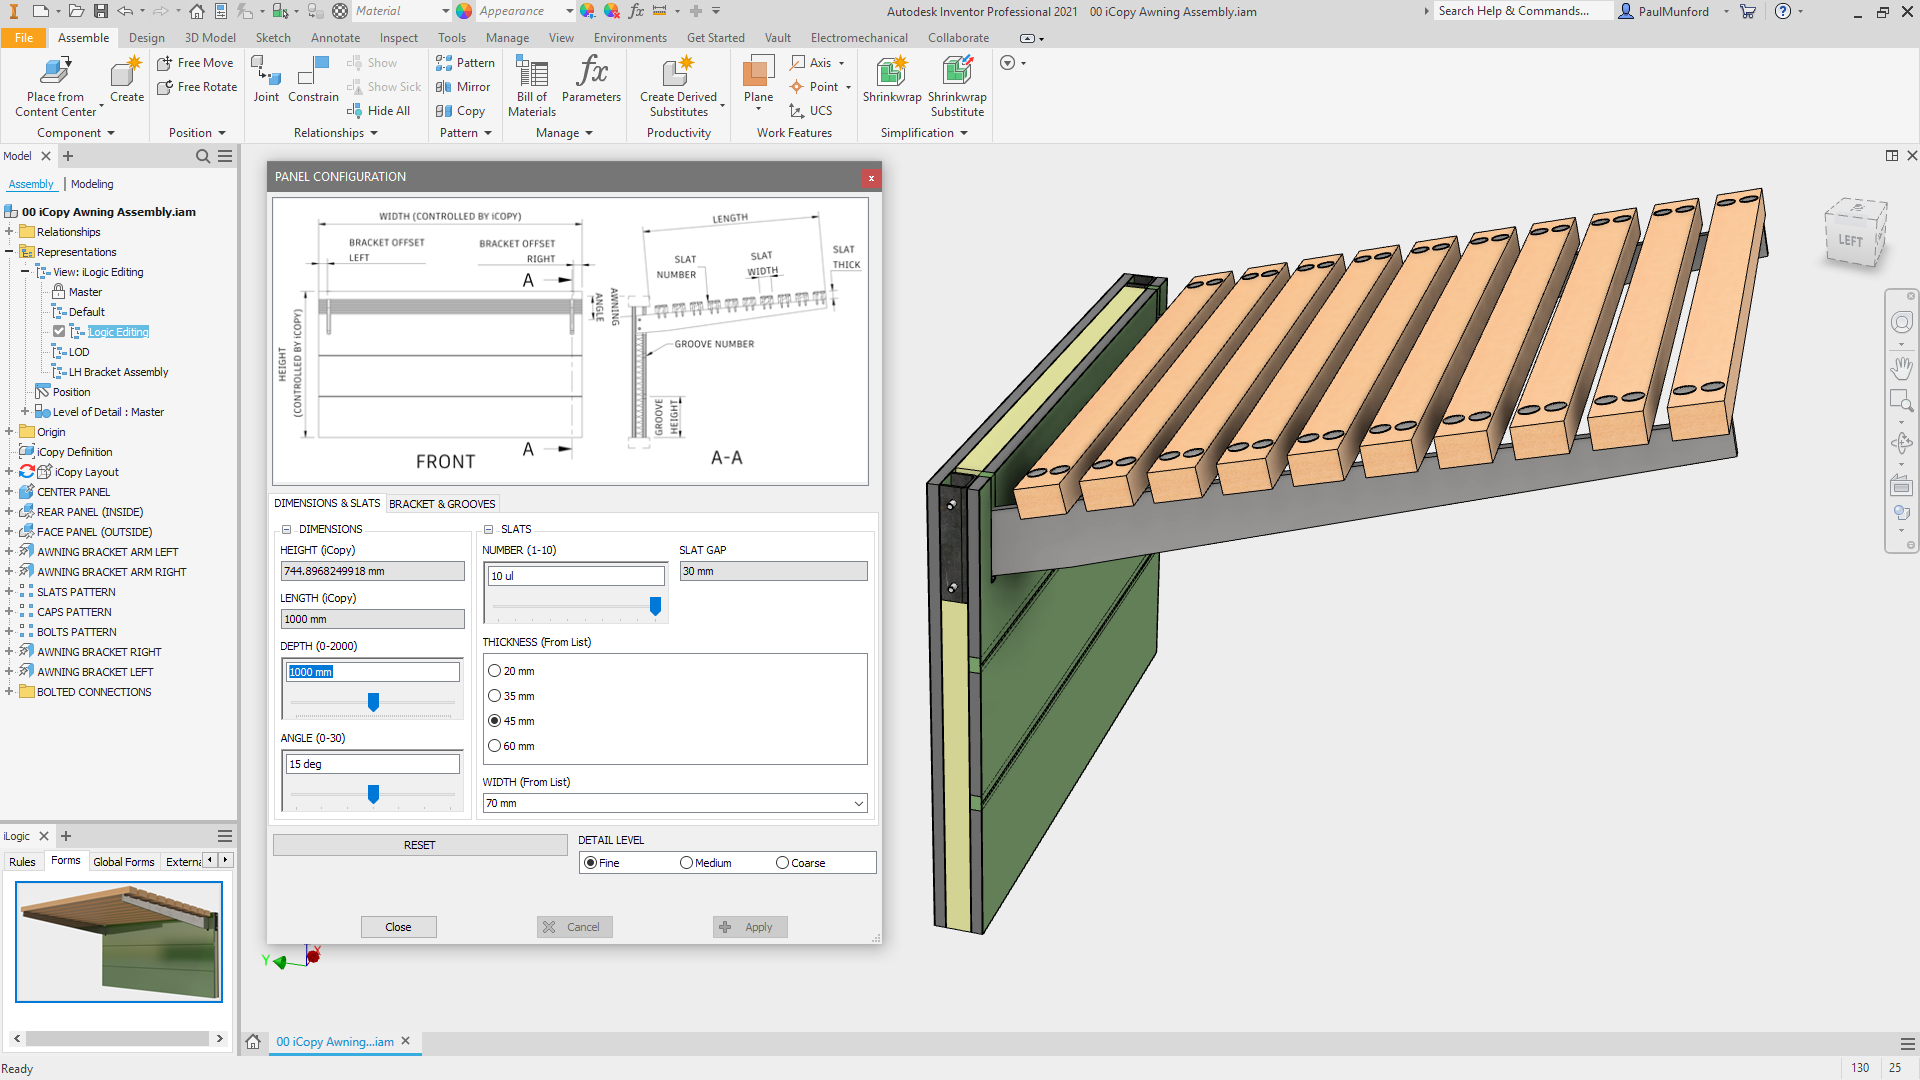 autodesk inventor 2020 for students